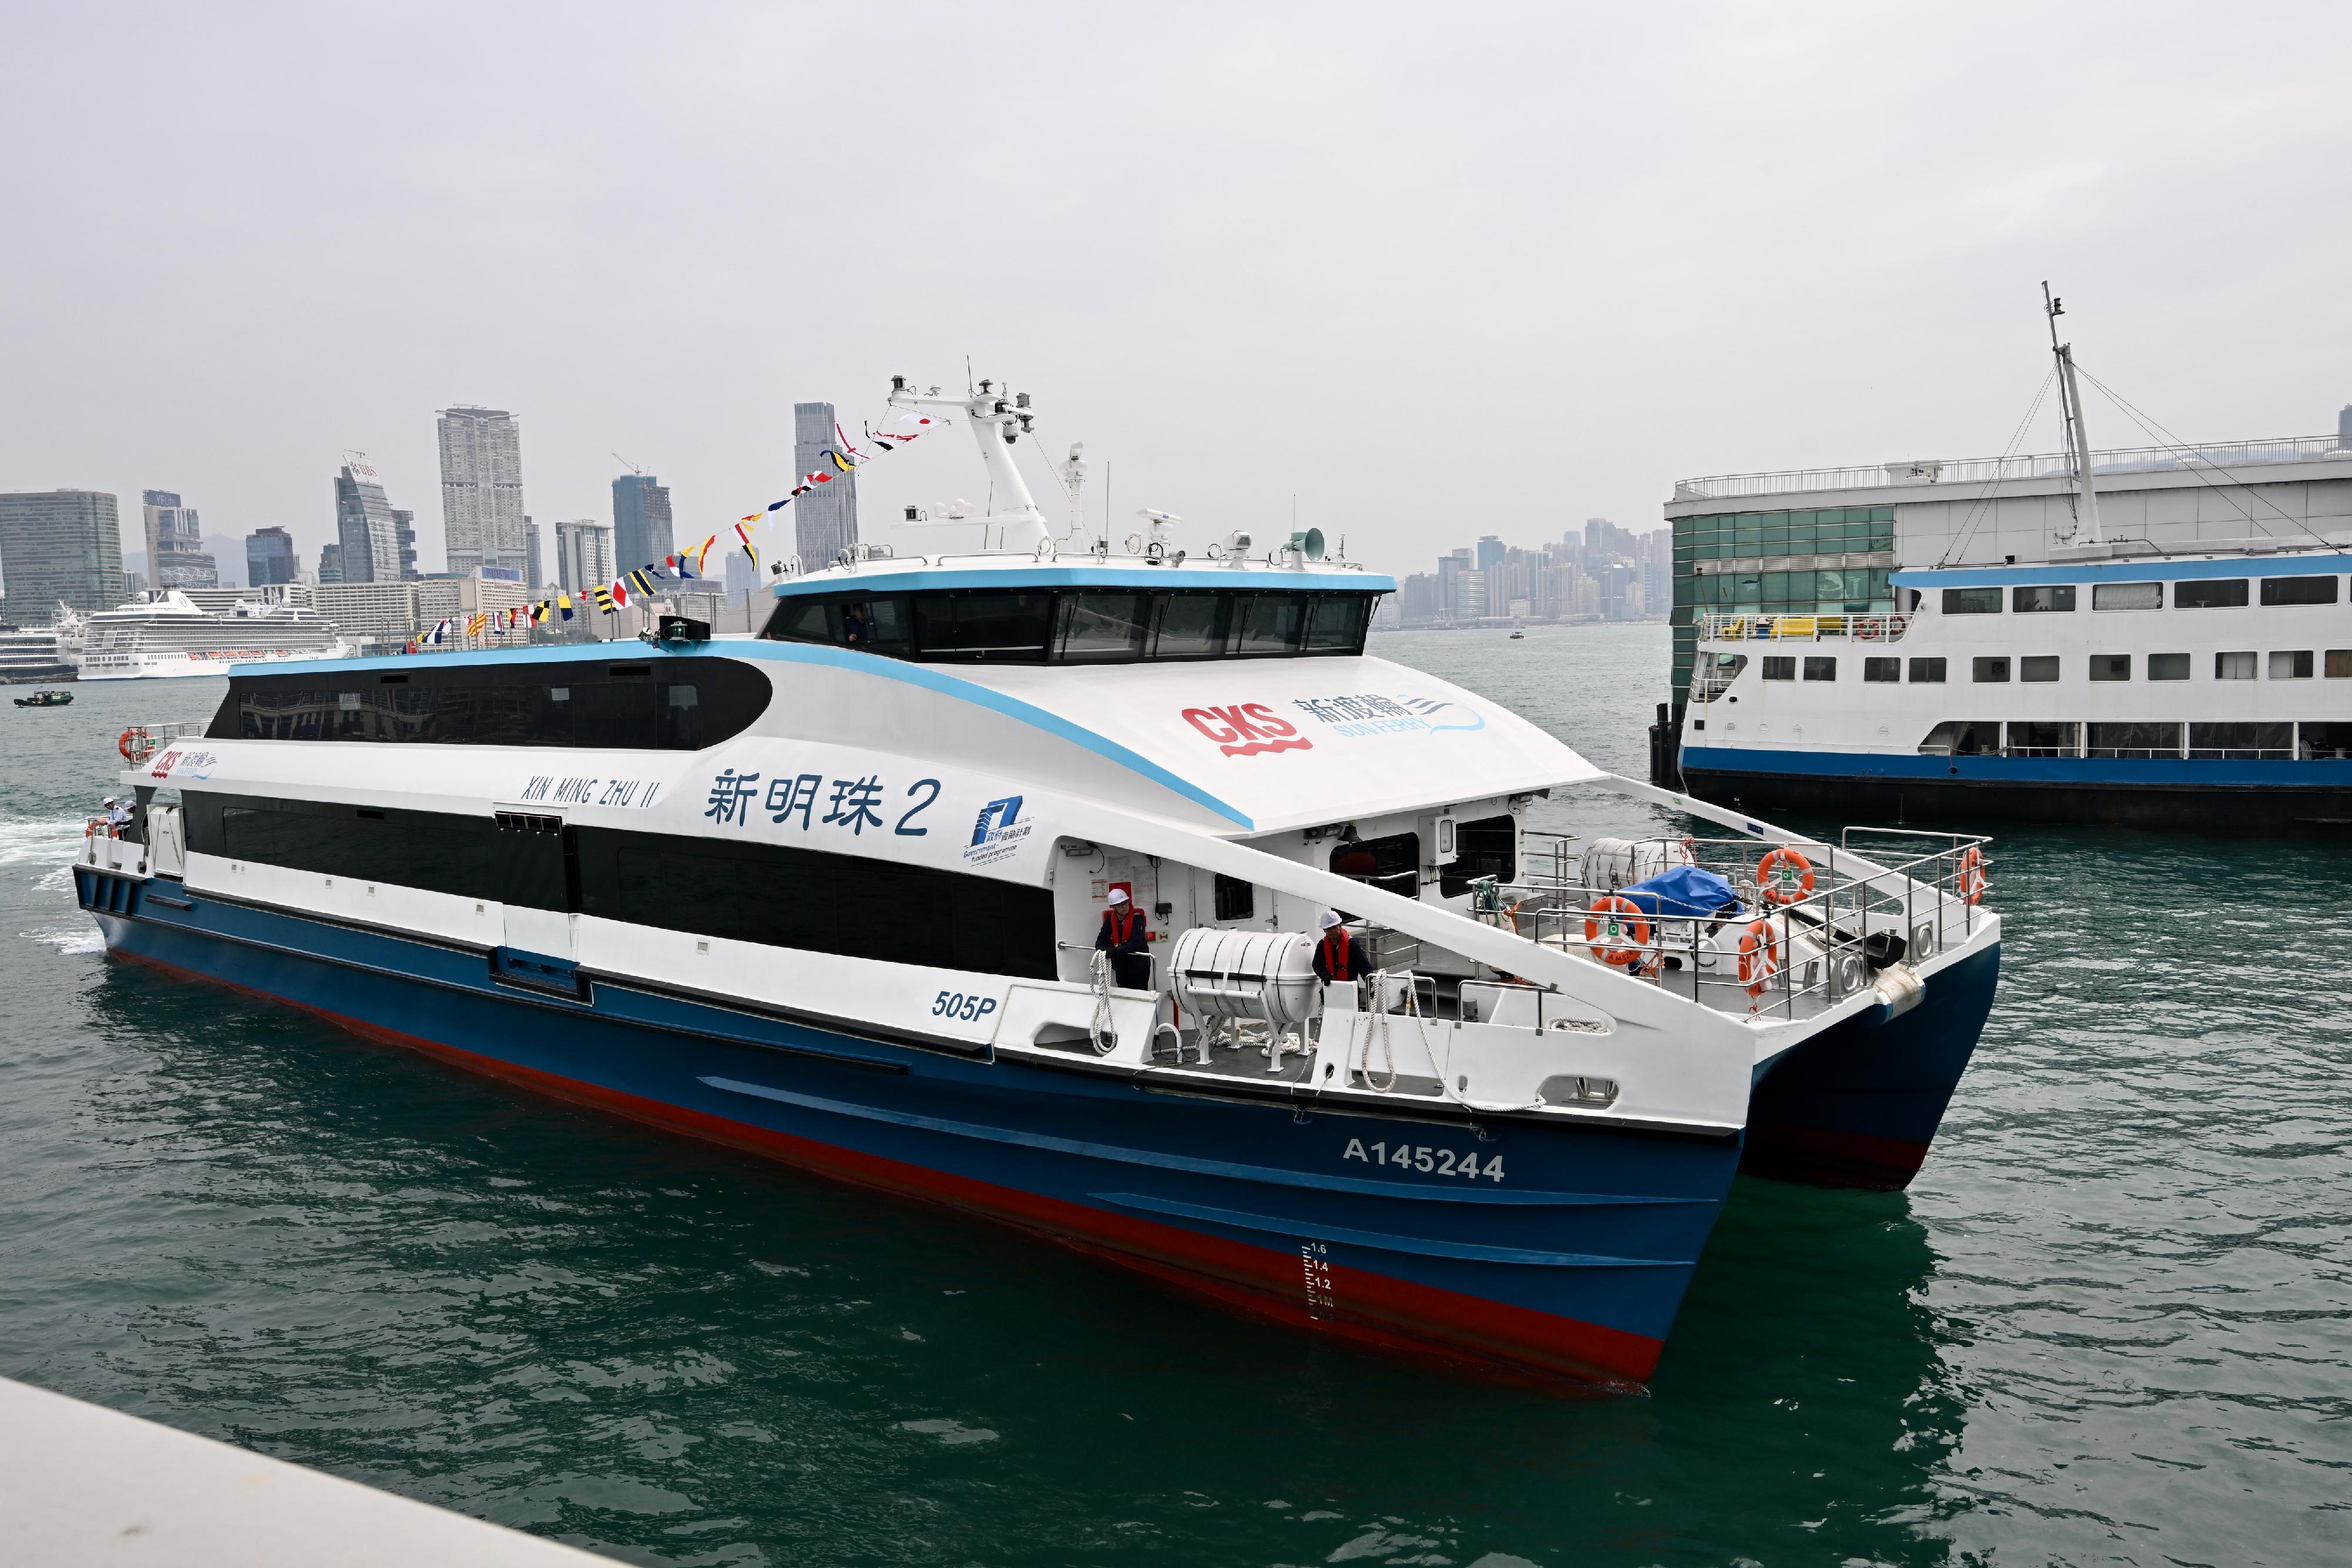 The Transport Department announced today (February 27) that the first batch of three fully government-subsidised new vessels procured under Phase I of the Vessel Subsidy Scheme will be gradually deployed to provide services from March this year. Photo shows the appearance of the new vessel operating the Central - Cheung Chau and Mui Wo route. The vessel features the newly designed promotional logo for government-funded projects.